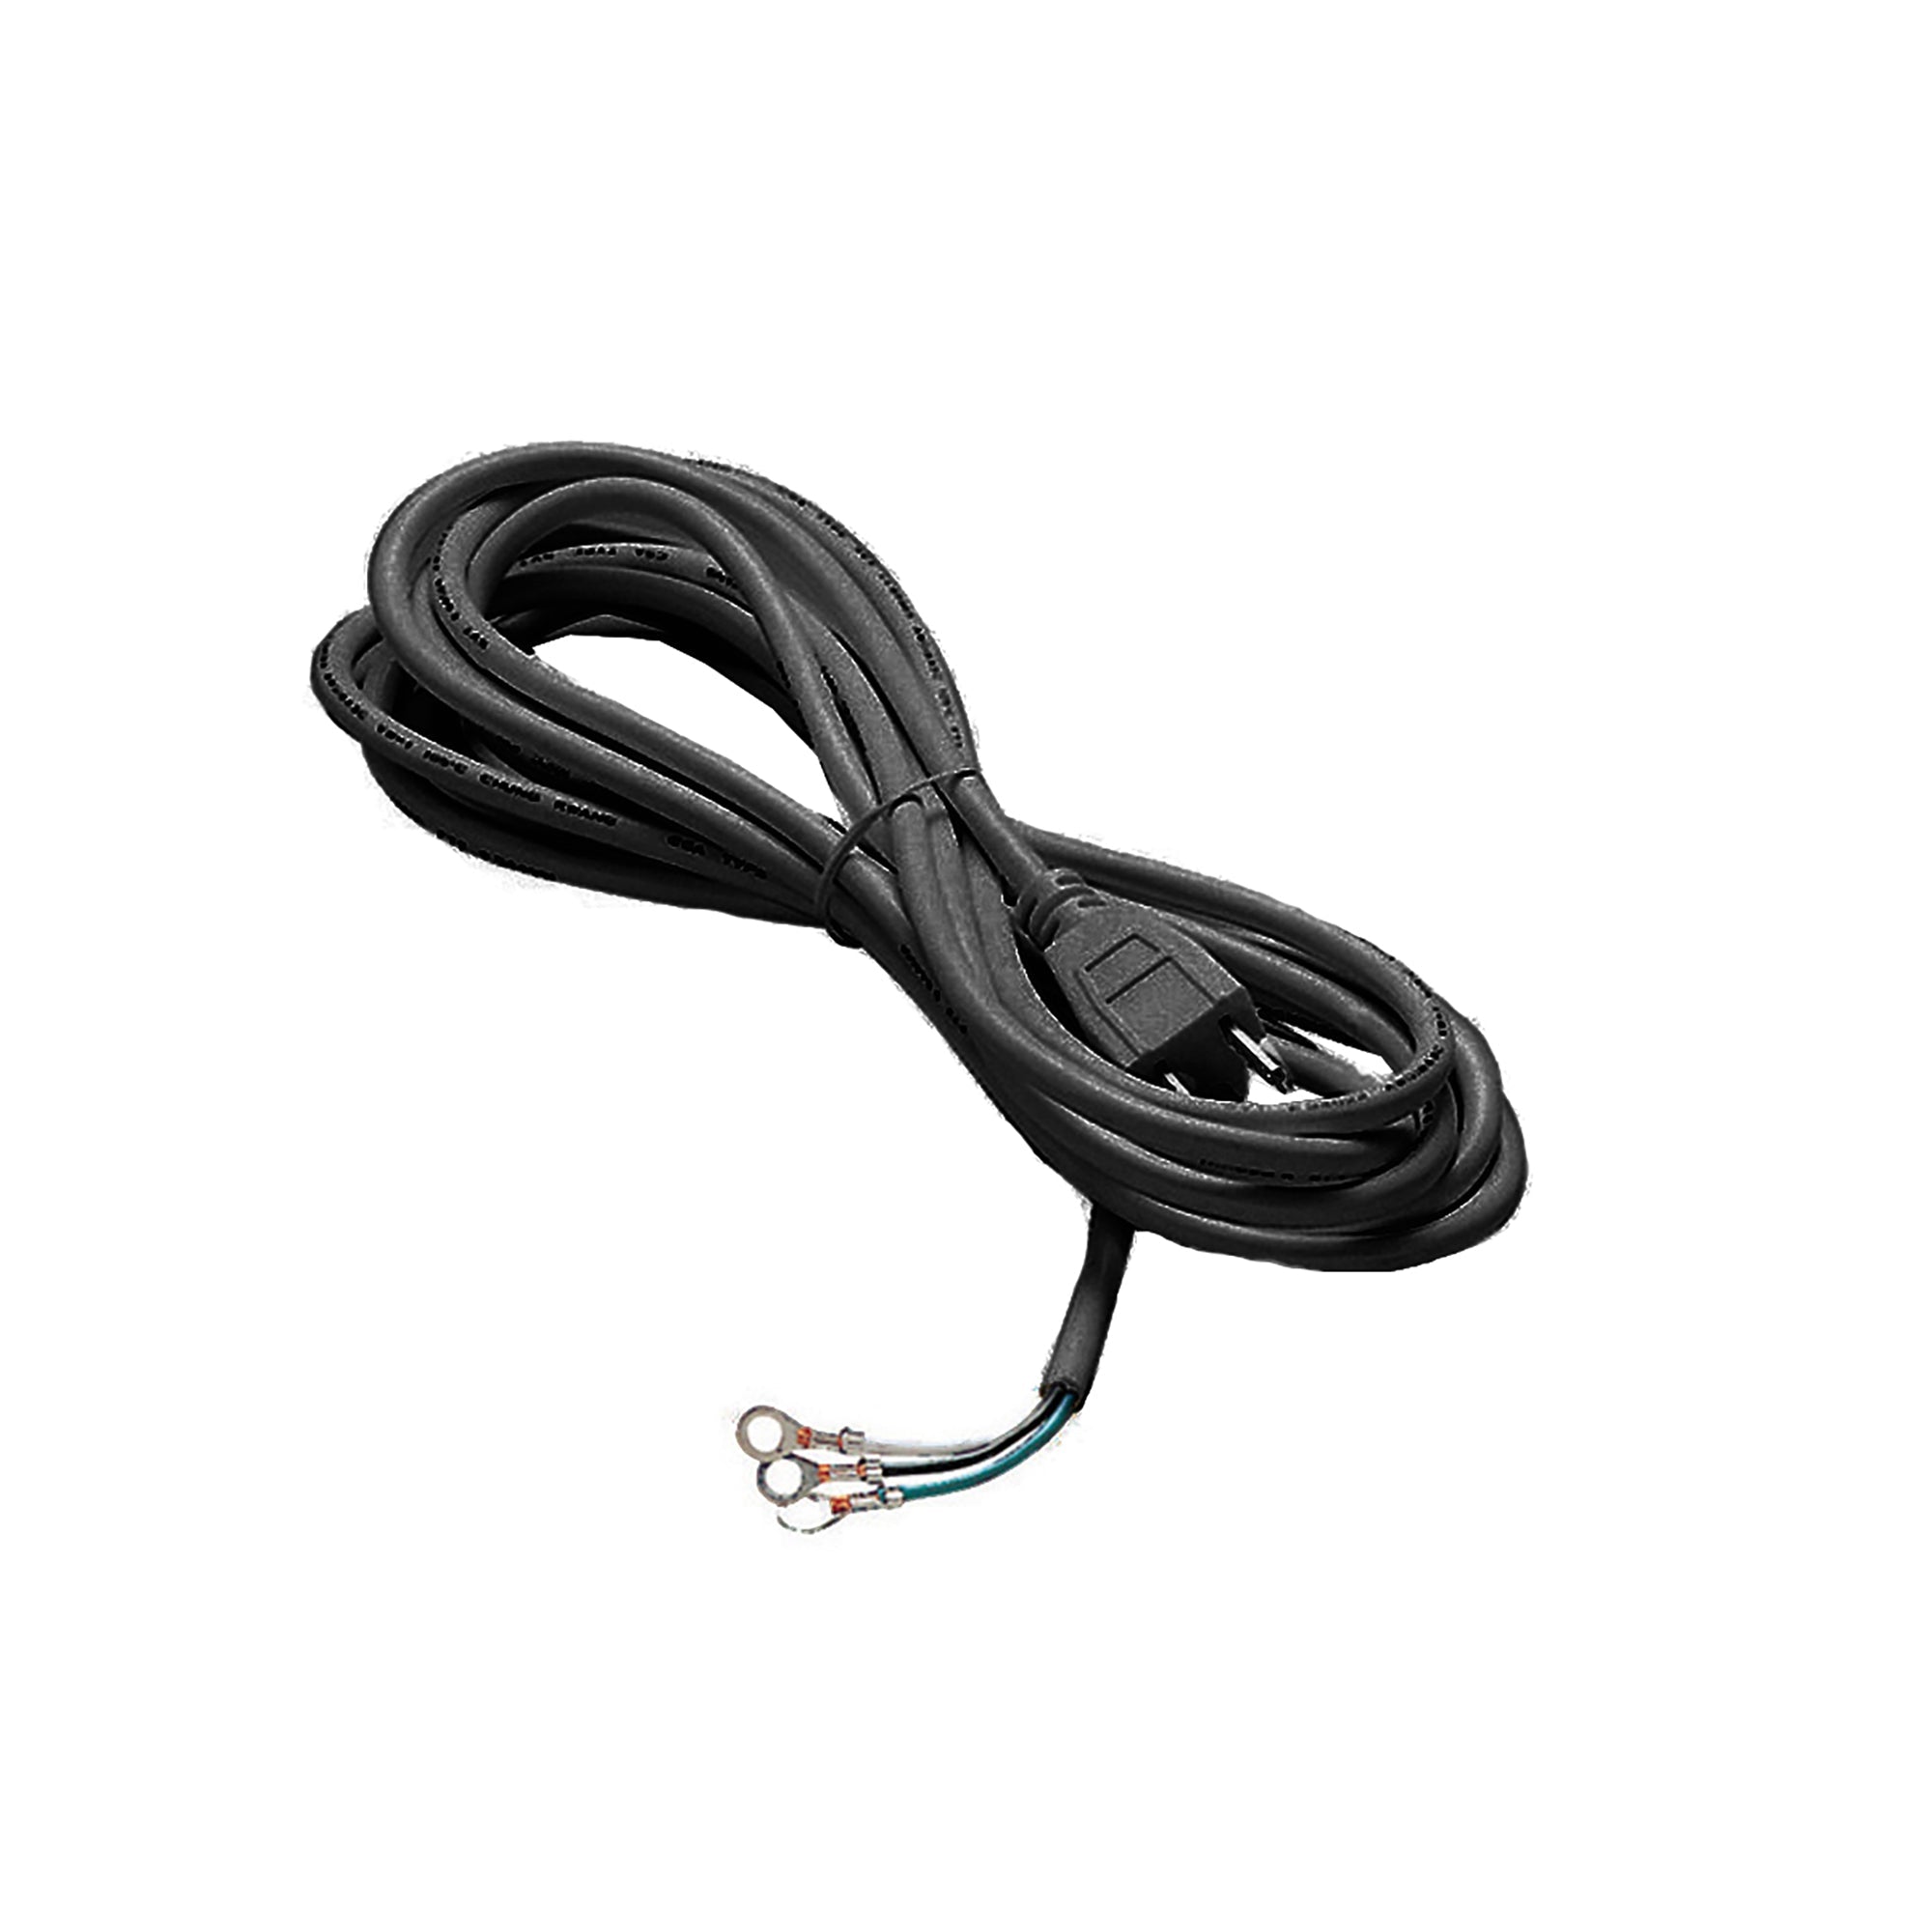 3-Wire Power Cord with Ground